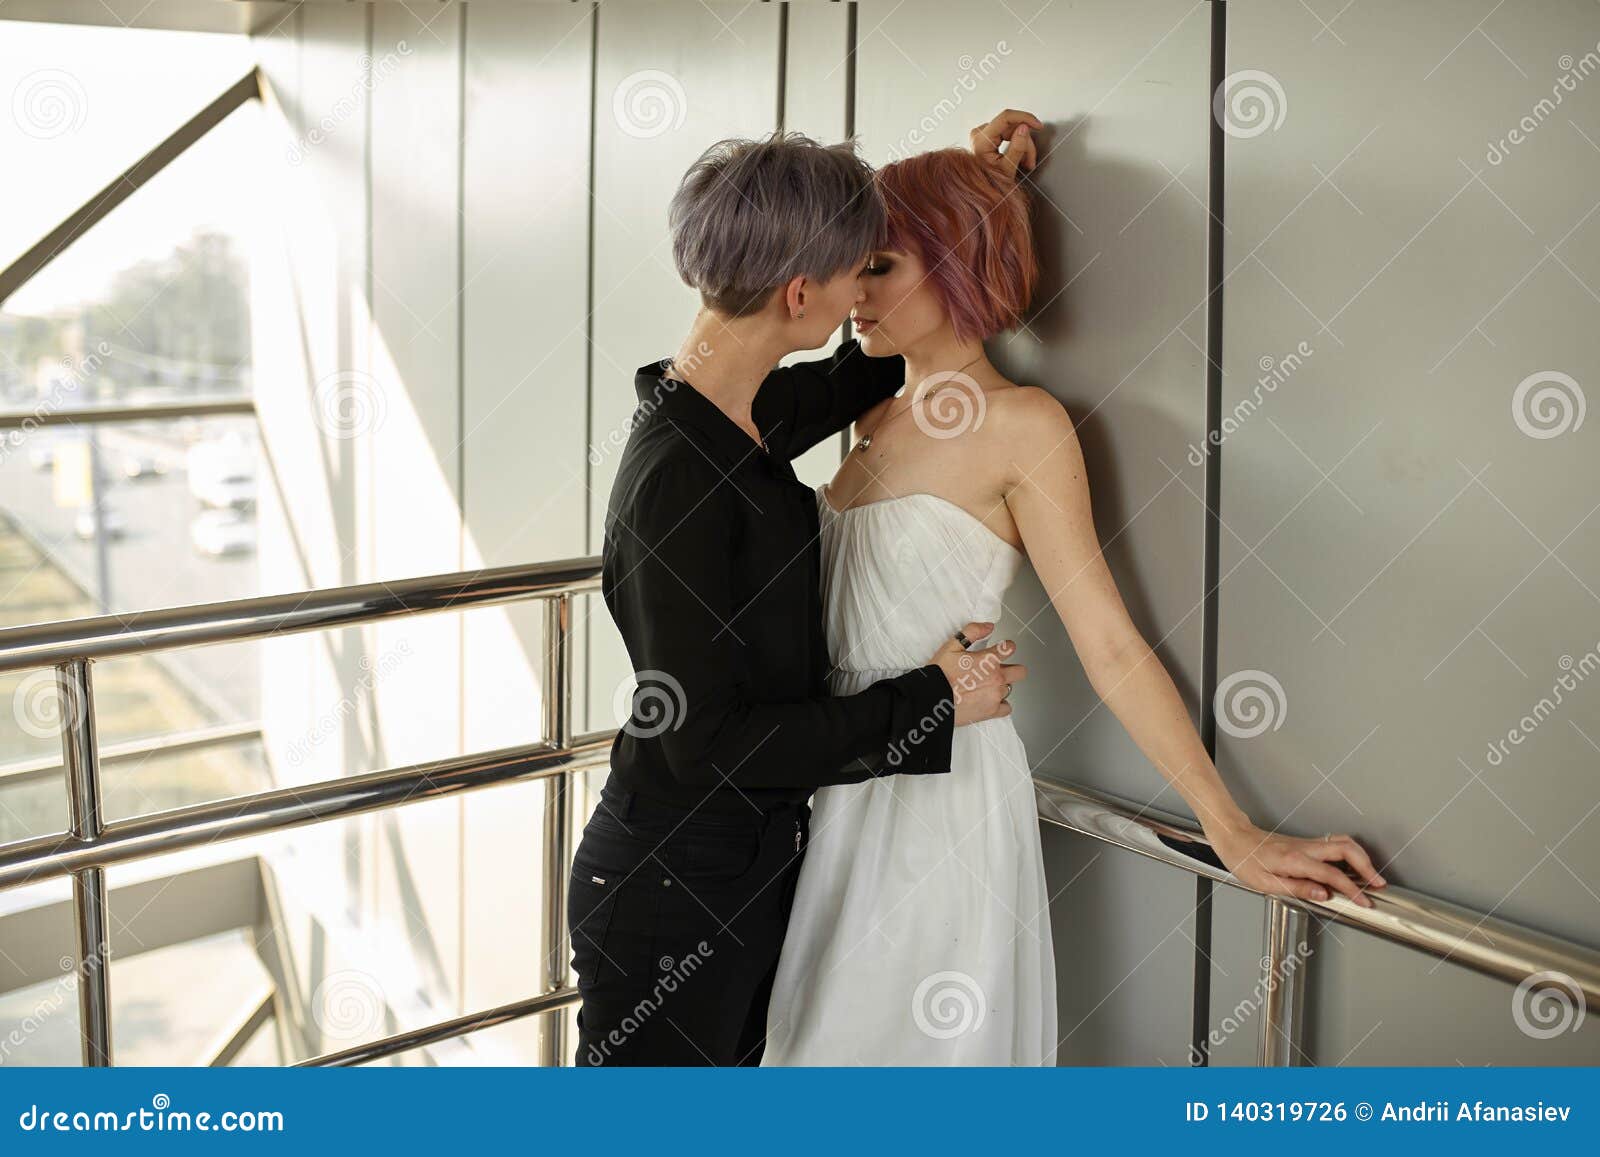 Beautiful Lesbian Couple Hugging Love And Passion Between The Two Girls Stock Photo Image Of